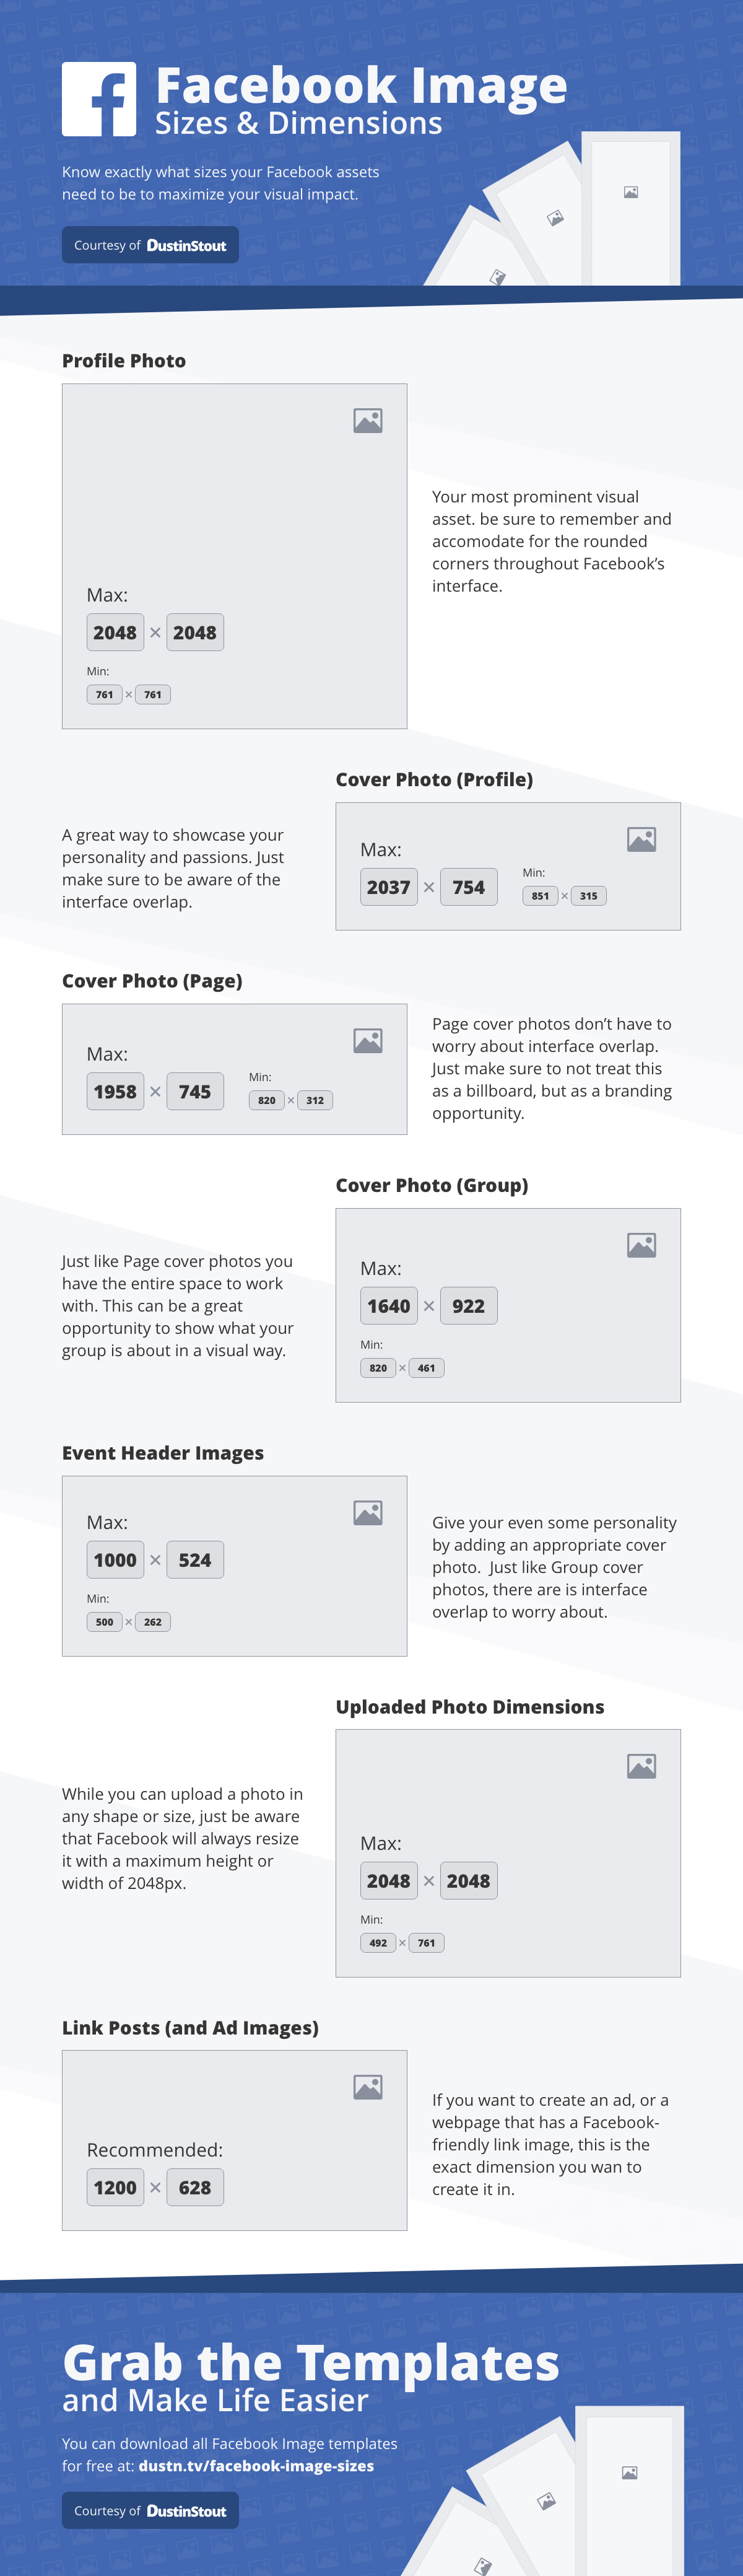 Ultimate Guide On Facebook Dimensions For All Page And Feed Images